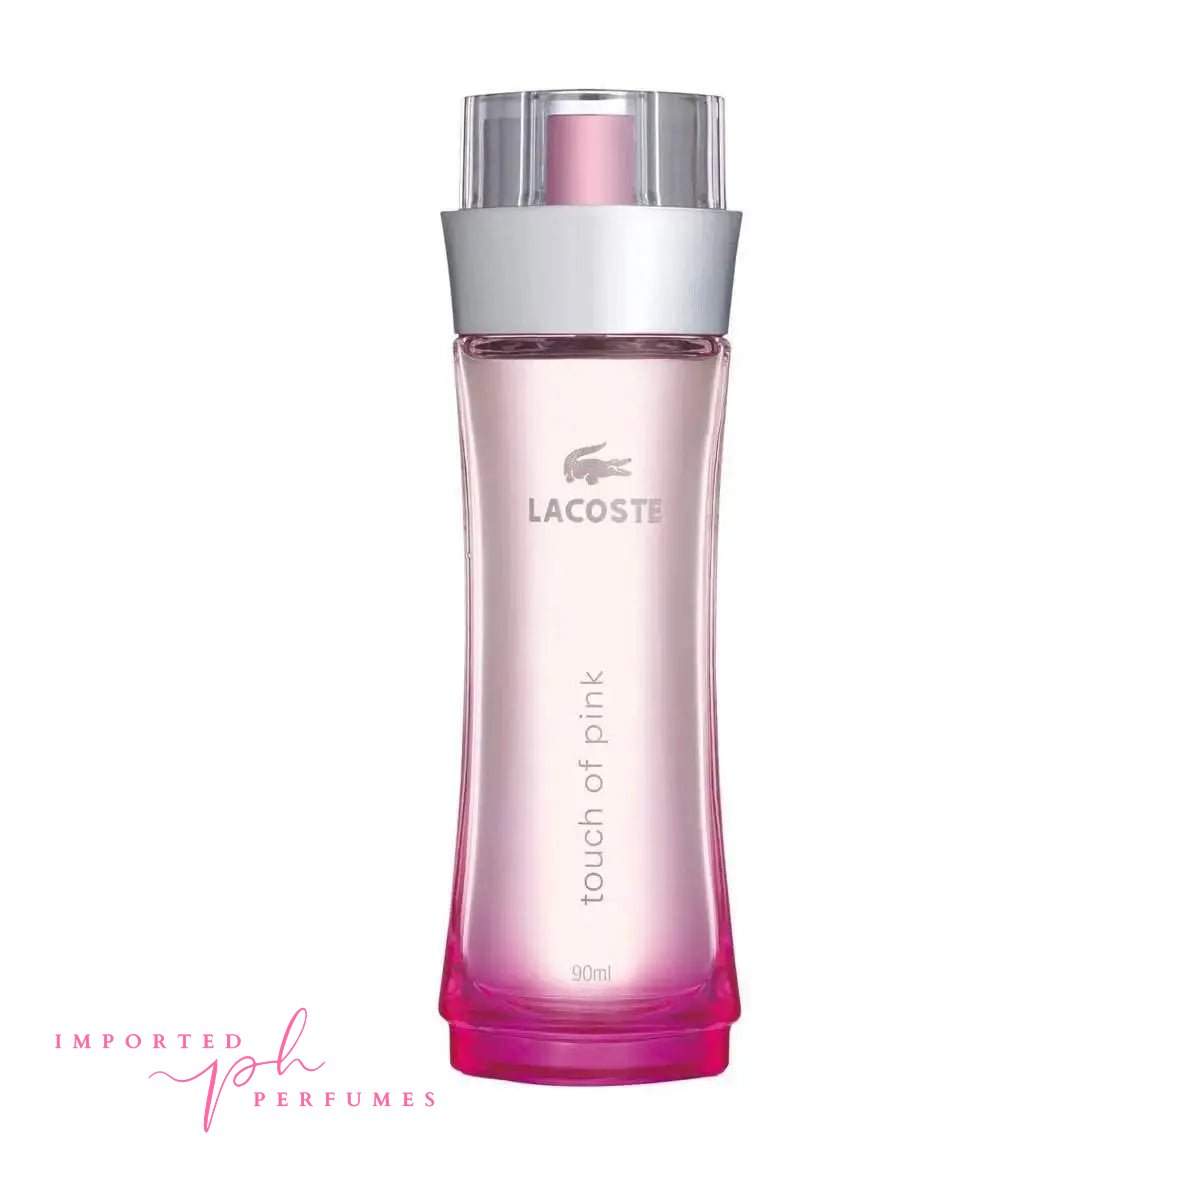 [TESTER] Lacoste Touch of Pink Eau de Toilette For Women 90ml-Imported Perfumes Co-Lacoste,pink,TESTER,touch of pink,women